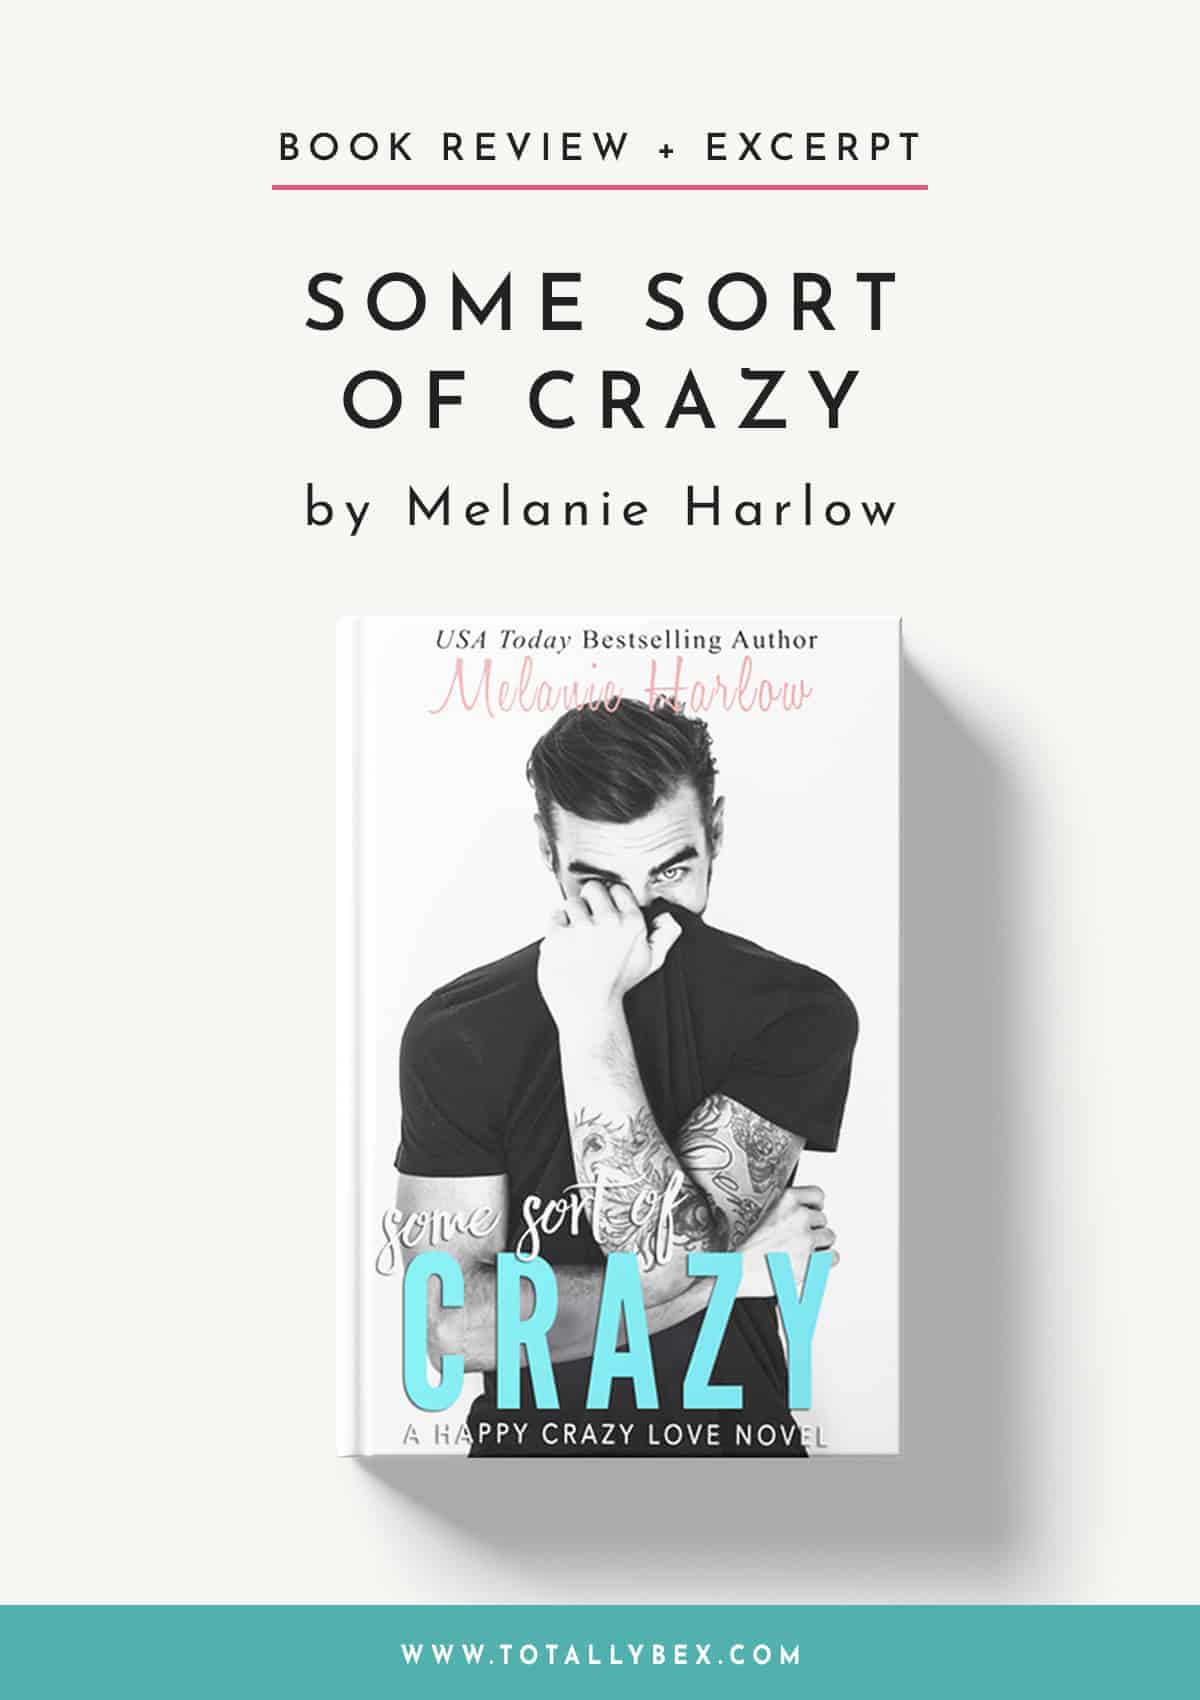 Some Sort of Crazy by Melanie Harlow-Book Review+Excerpt